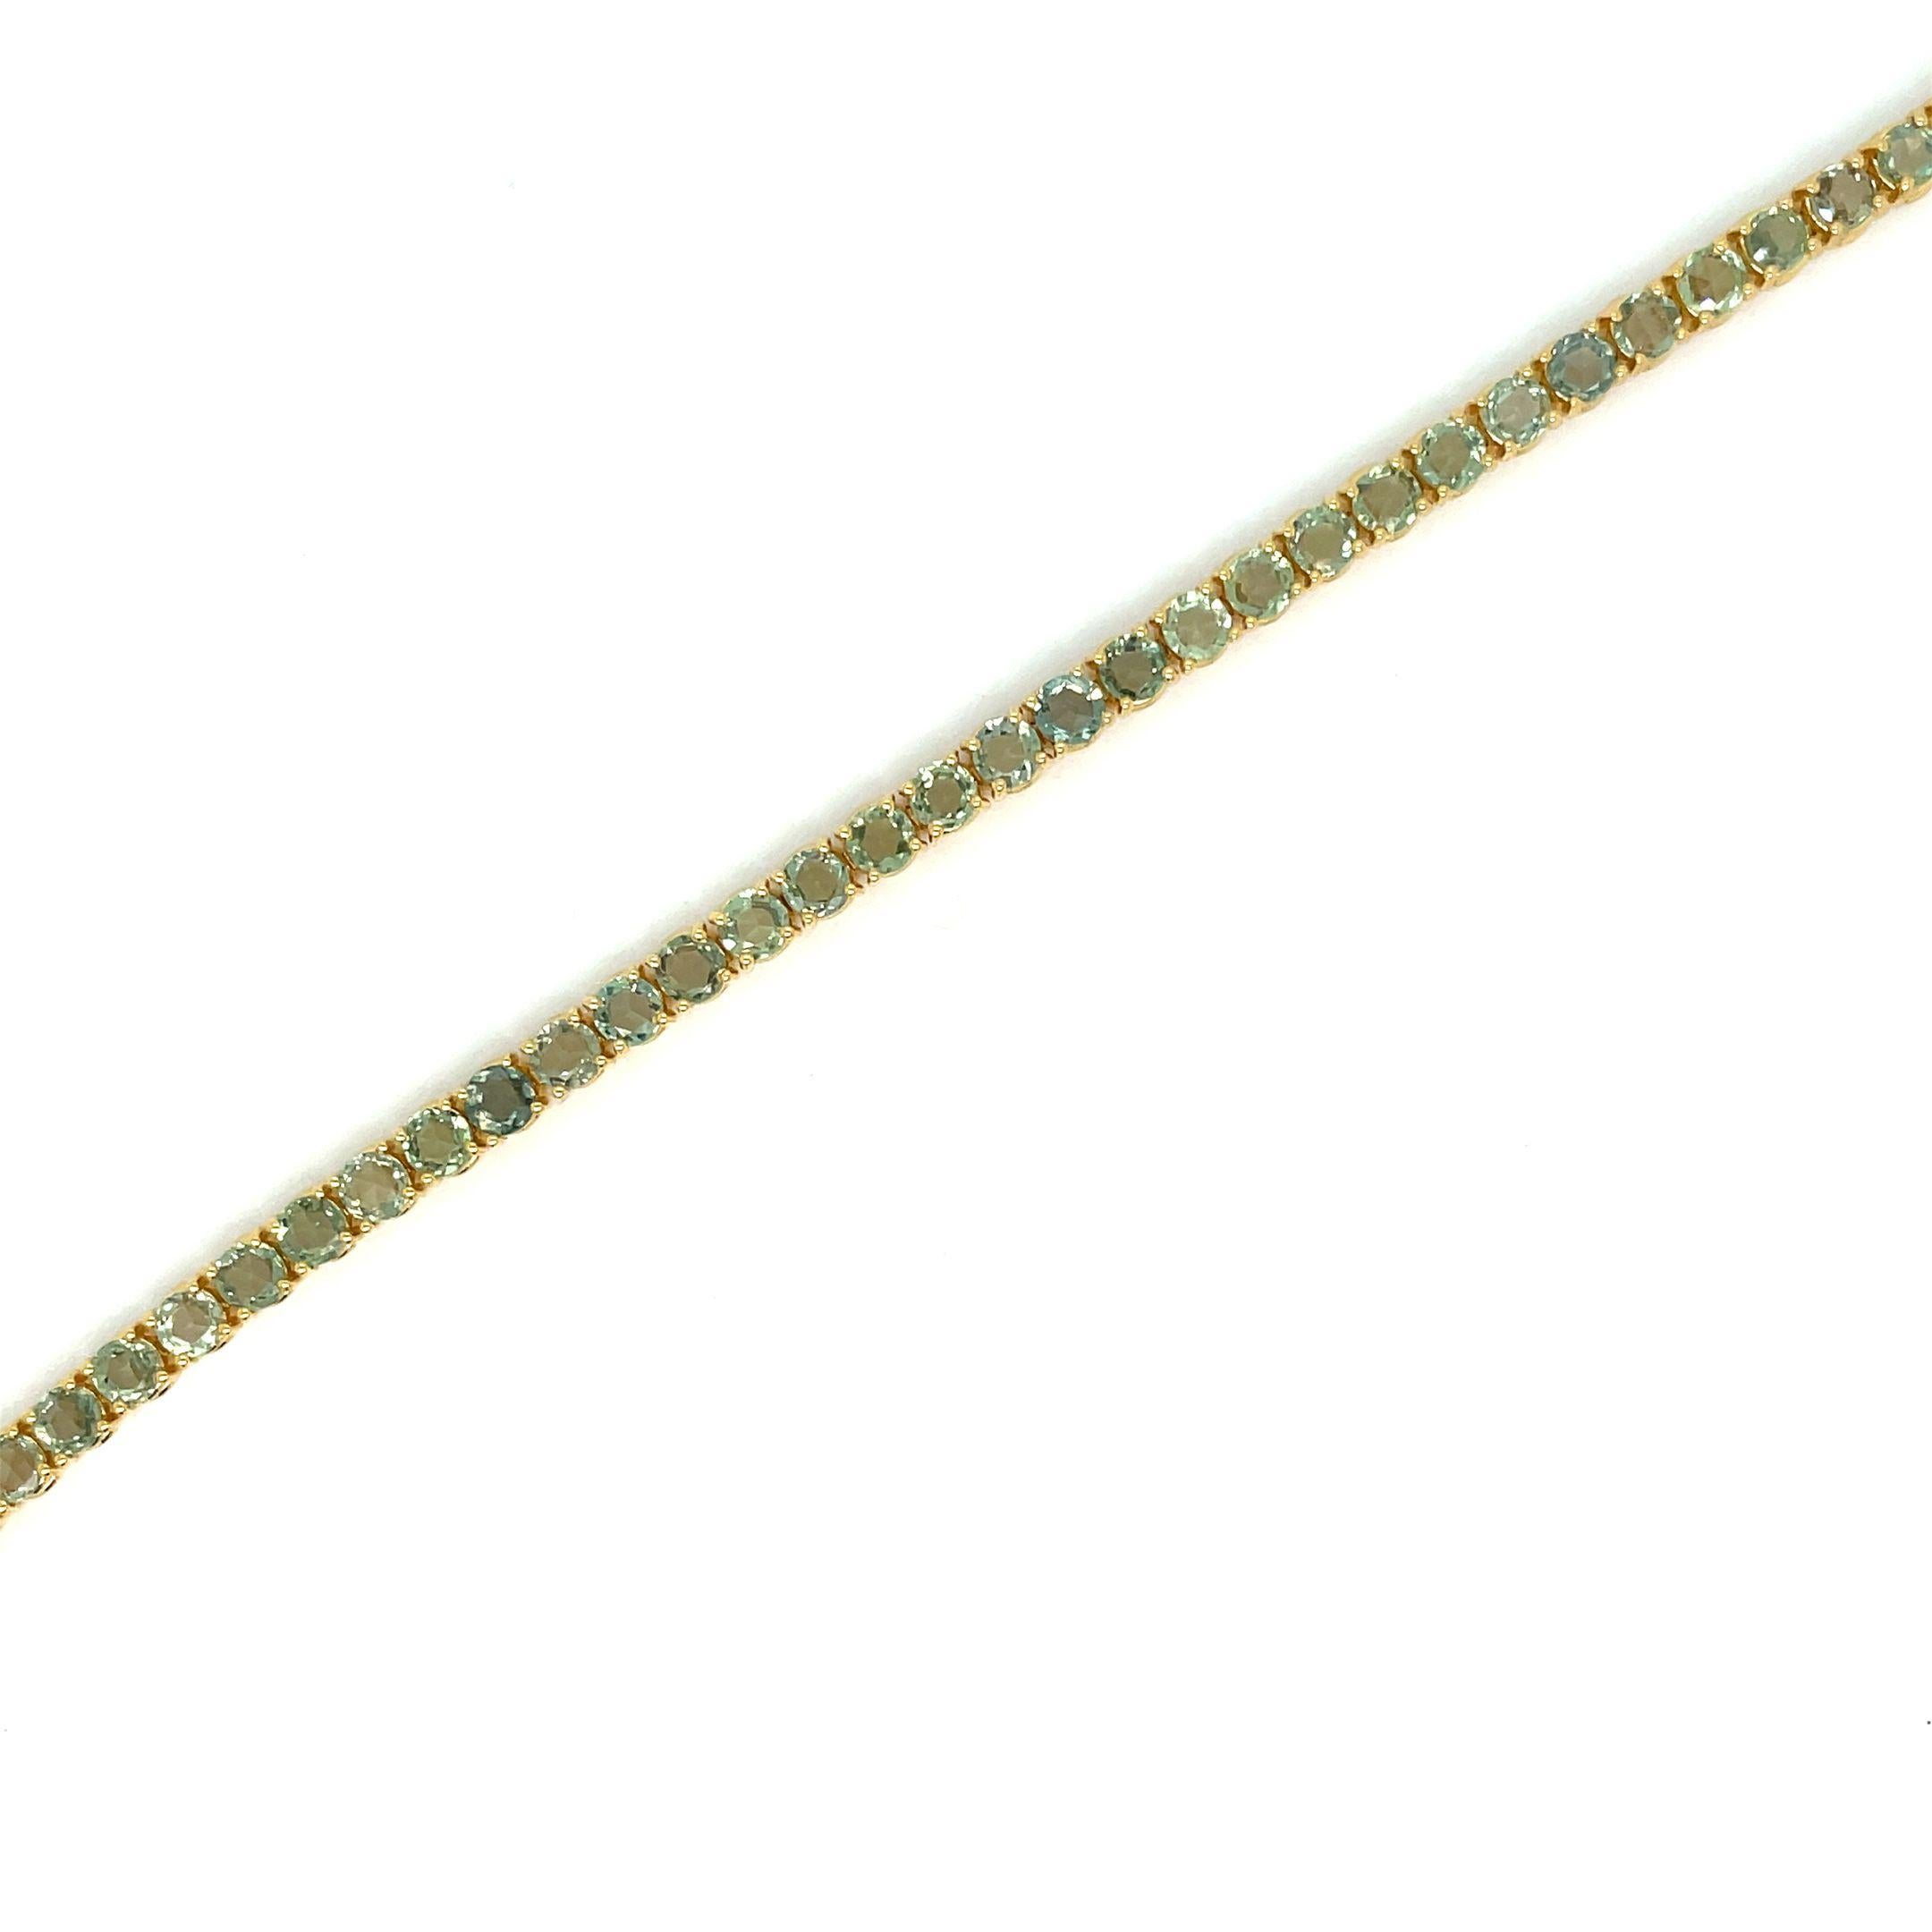 Fabulous important brand new bracelet made in solid 9 kt yellow gold and set with 9,80 Carats of rose cut vivid Natural Green Sapphires, weighing 0.21 carat each (3,5 mm).
This piece is designed and crafted in our laboratories, thanks to old